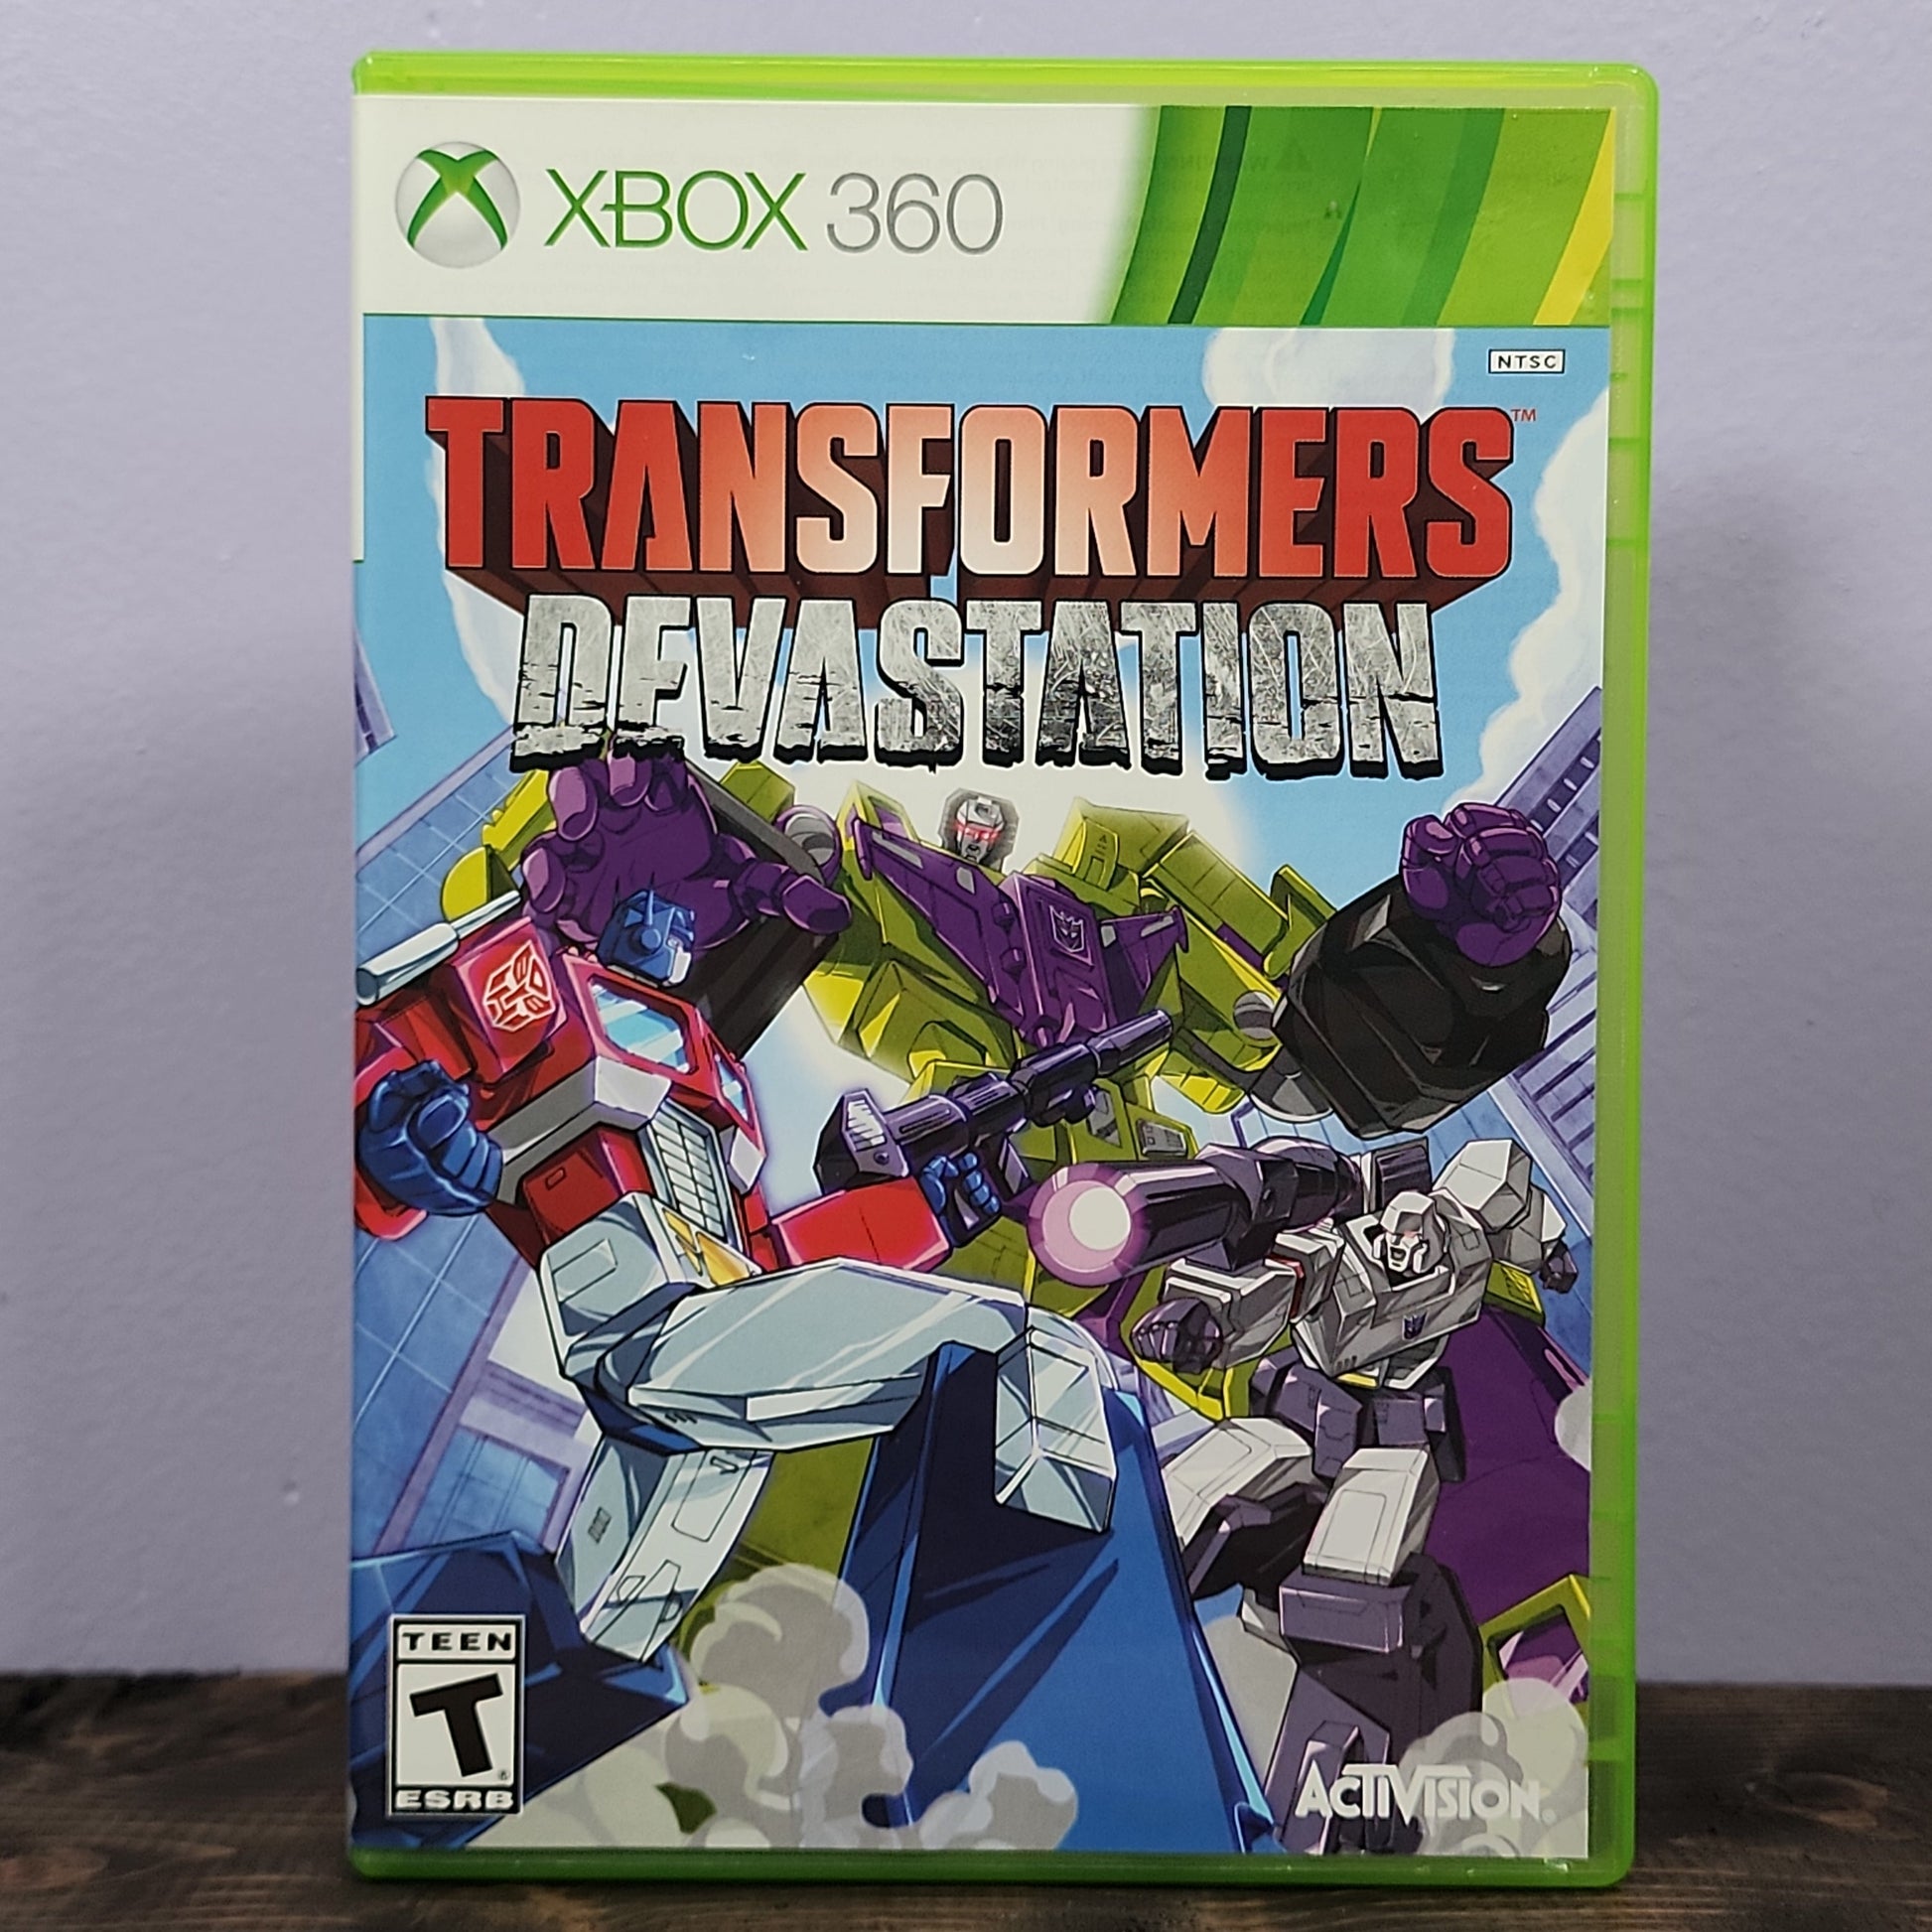 Xbox 360 - Transformers: Devastation Retrograde Collectibles Action, Activision, Adventure, Beat 'Em Up, CIB, PlatinumGames, Sci-Fi, T Rated, Transformers Series Preowned Video Game 